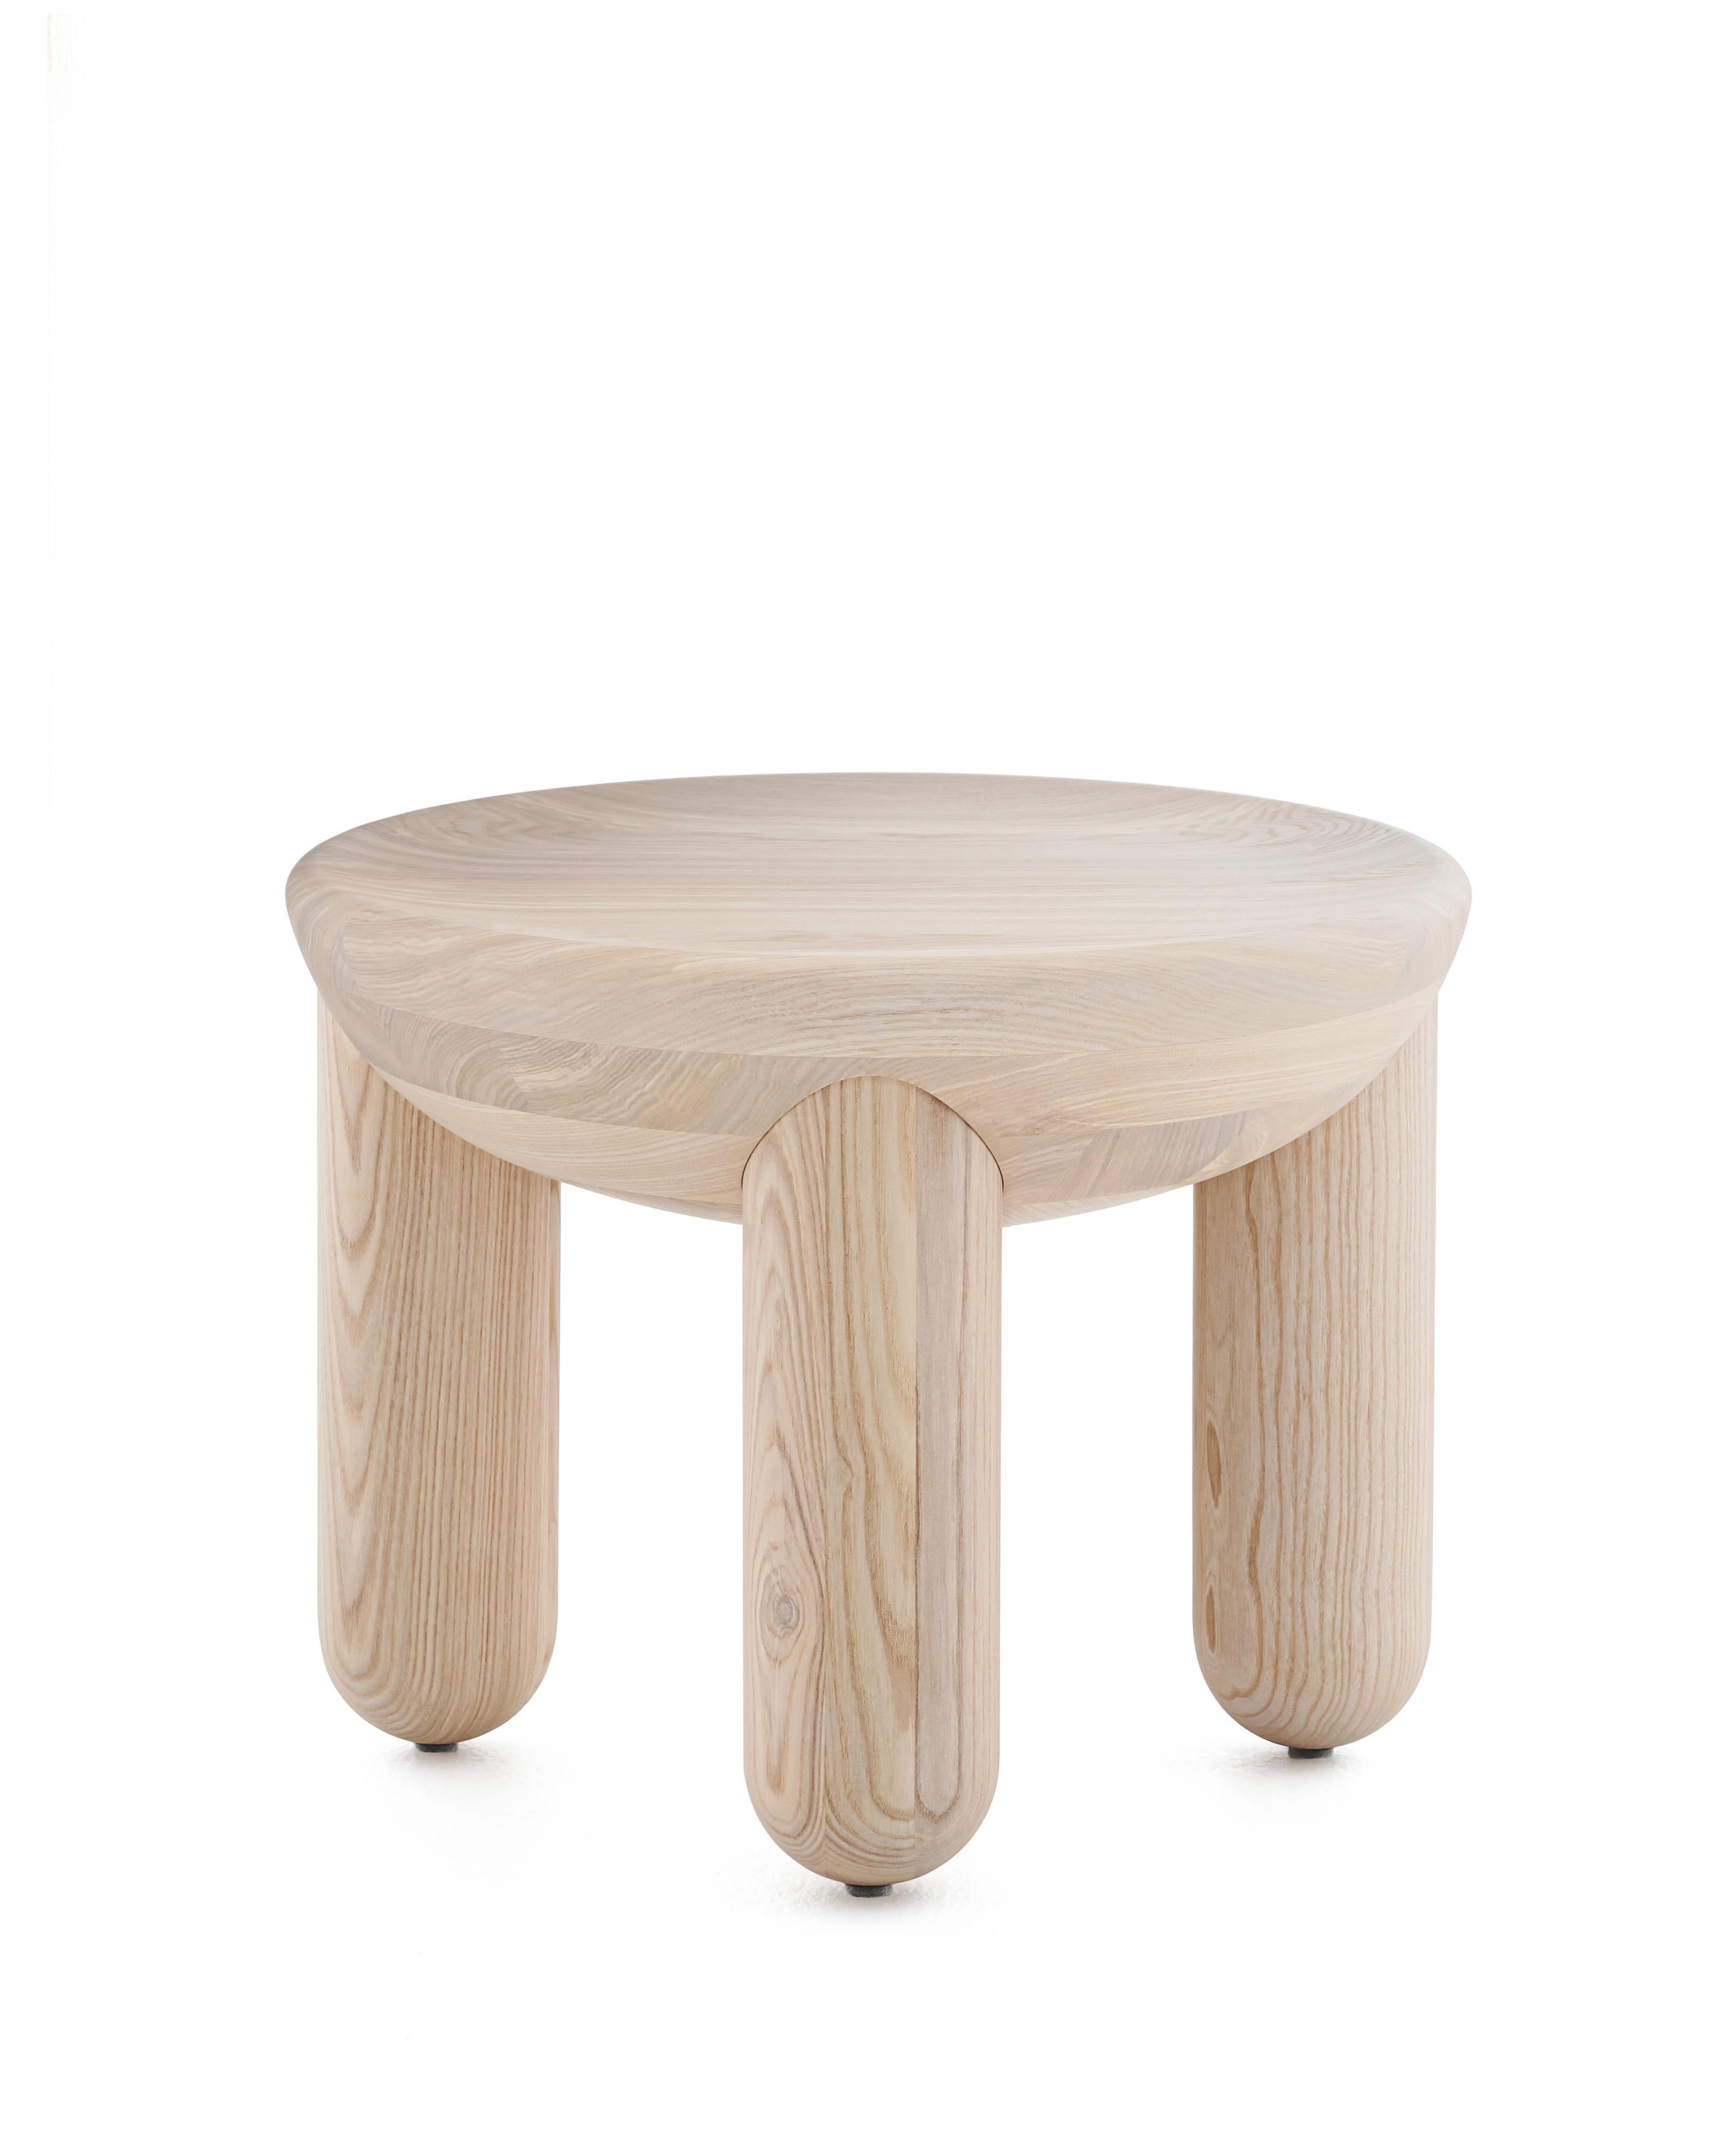 Wooden Coffee Table Freyja 2 in Thermo Oak finish by Noom 8